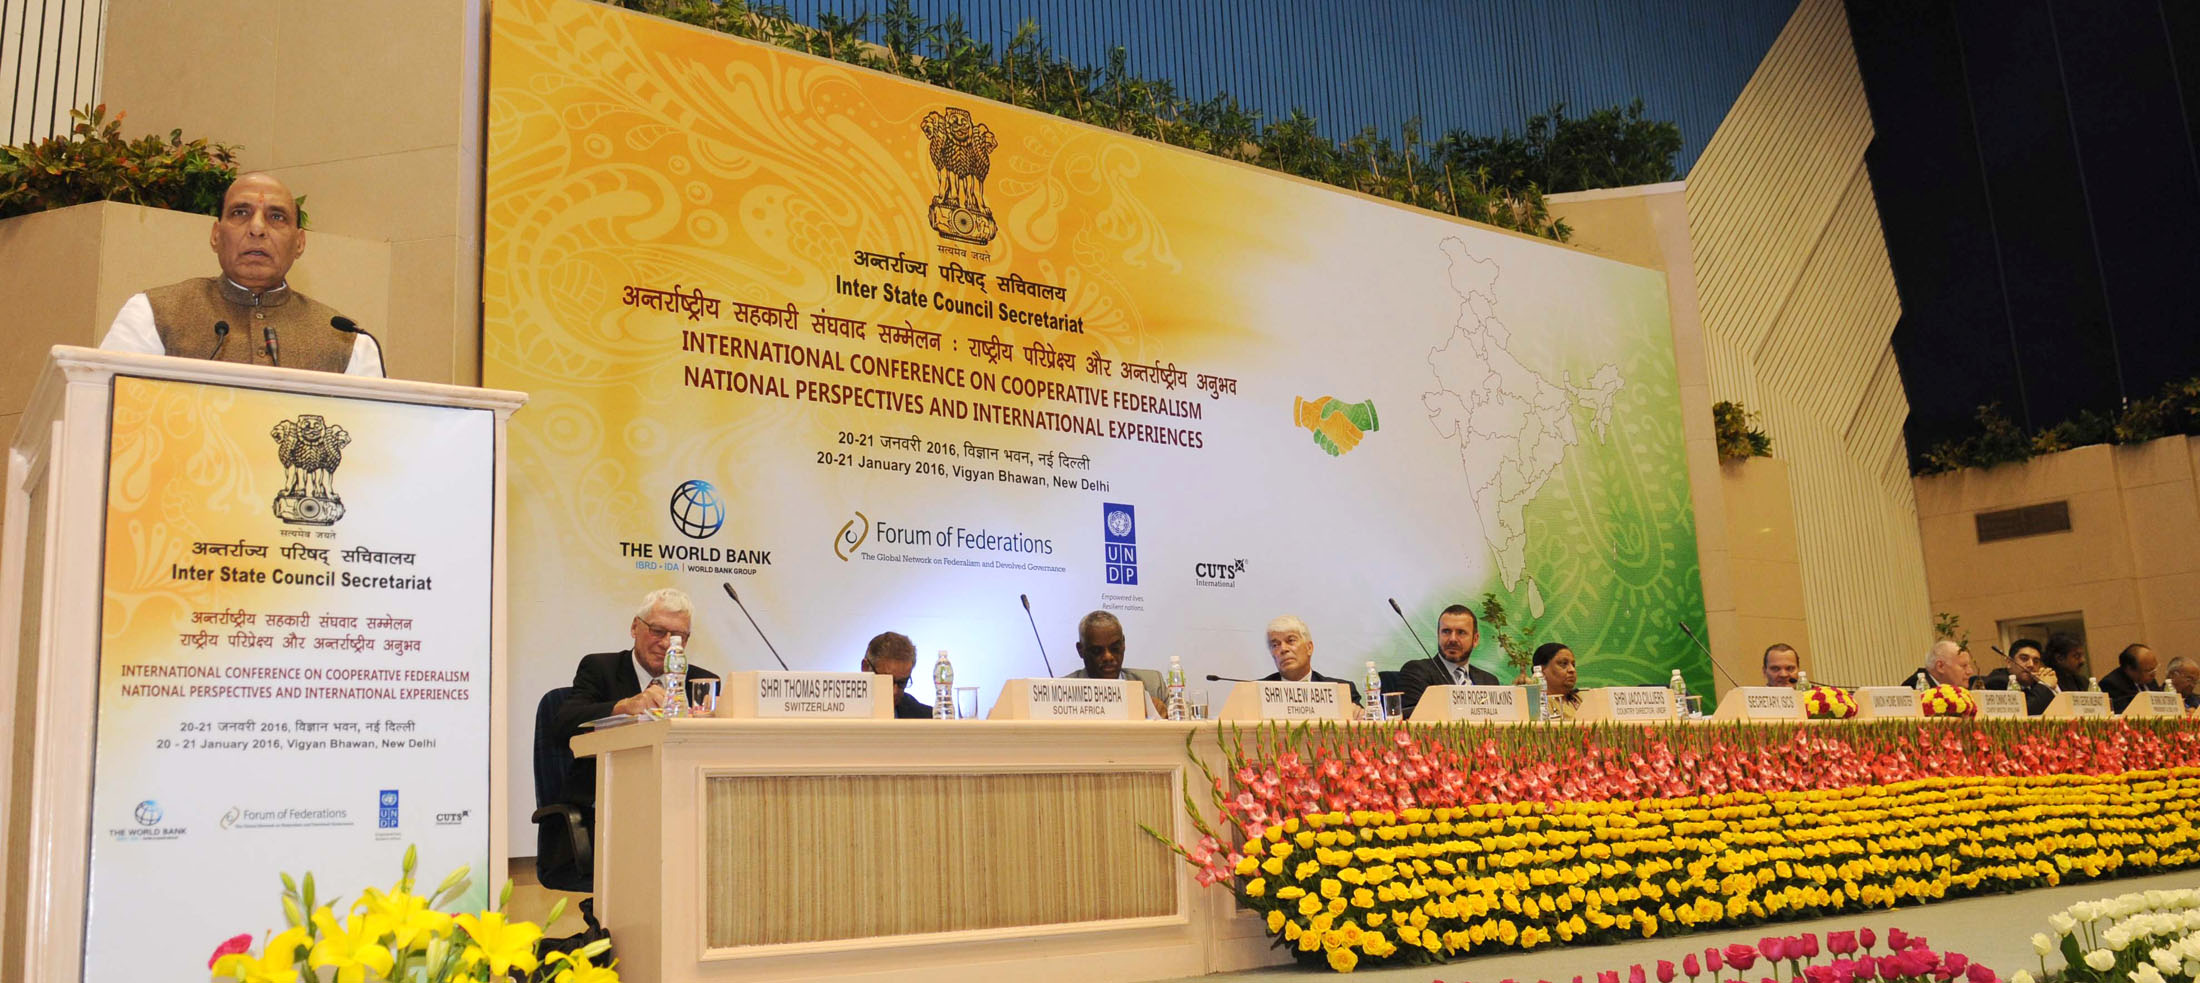 The Union Home Minister, Shri Rajnath Singh addressing the International Conference on Cooperative Federalism: National Perspectives and International Experience, in New Delhi on January 20, 2016.